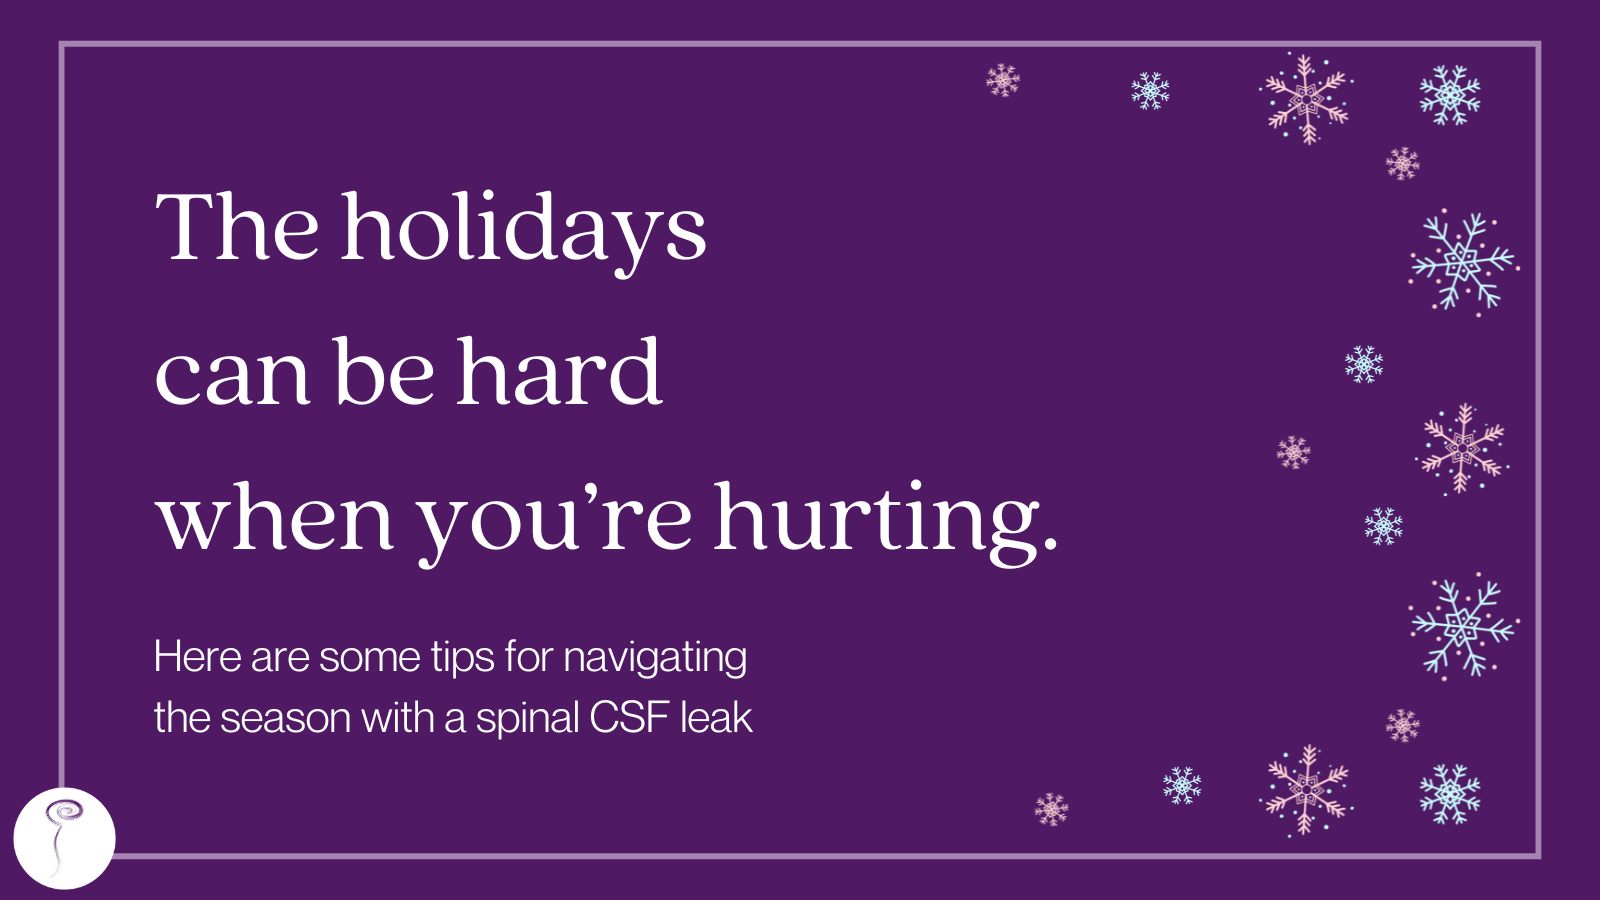 The holidays can be hard when you're hurting.